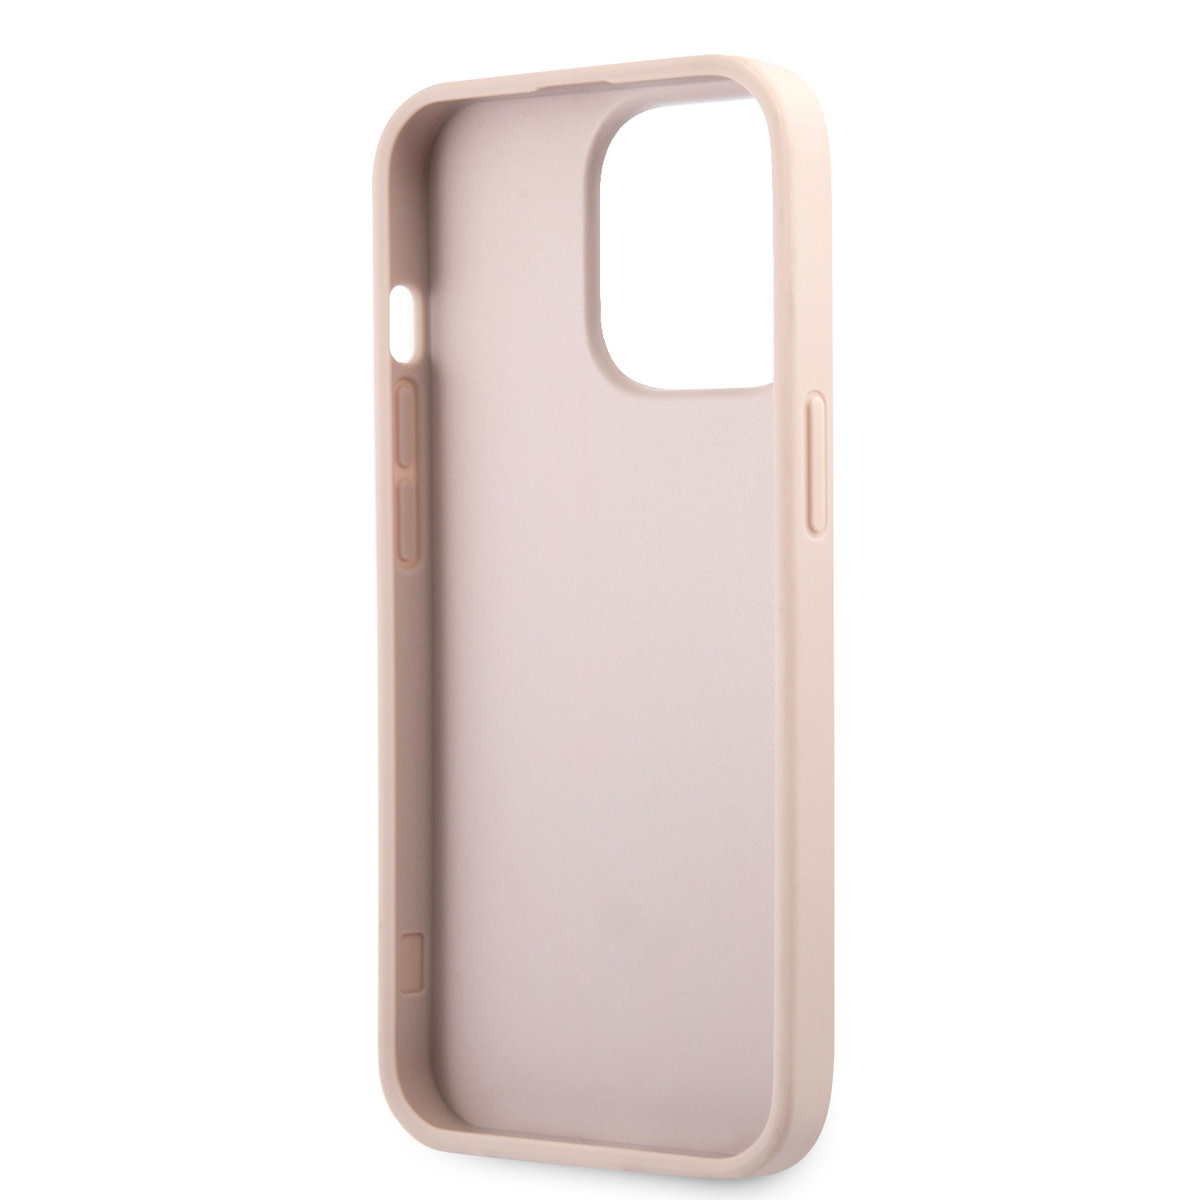 Guess iPhone 14 Pro Max Hardcase Backcover - 4G - 